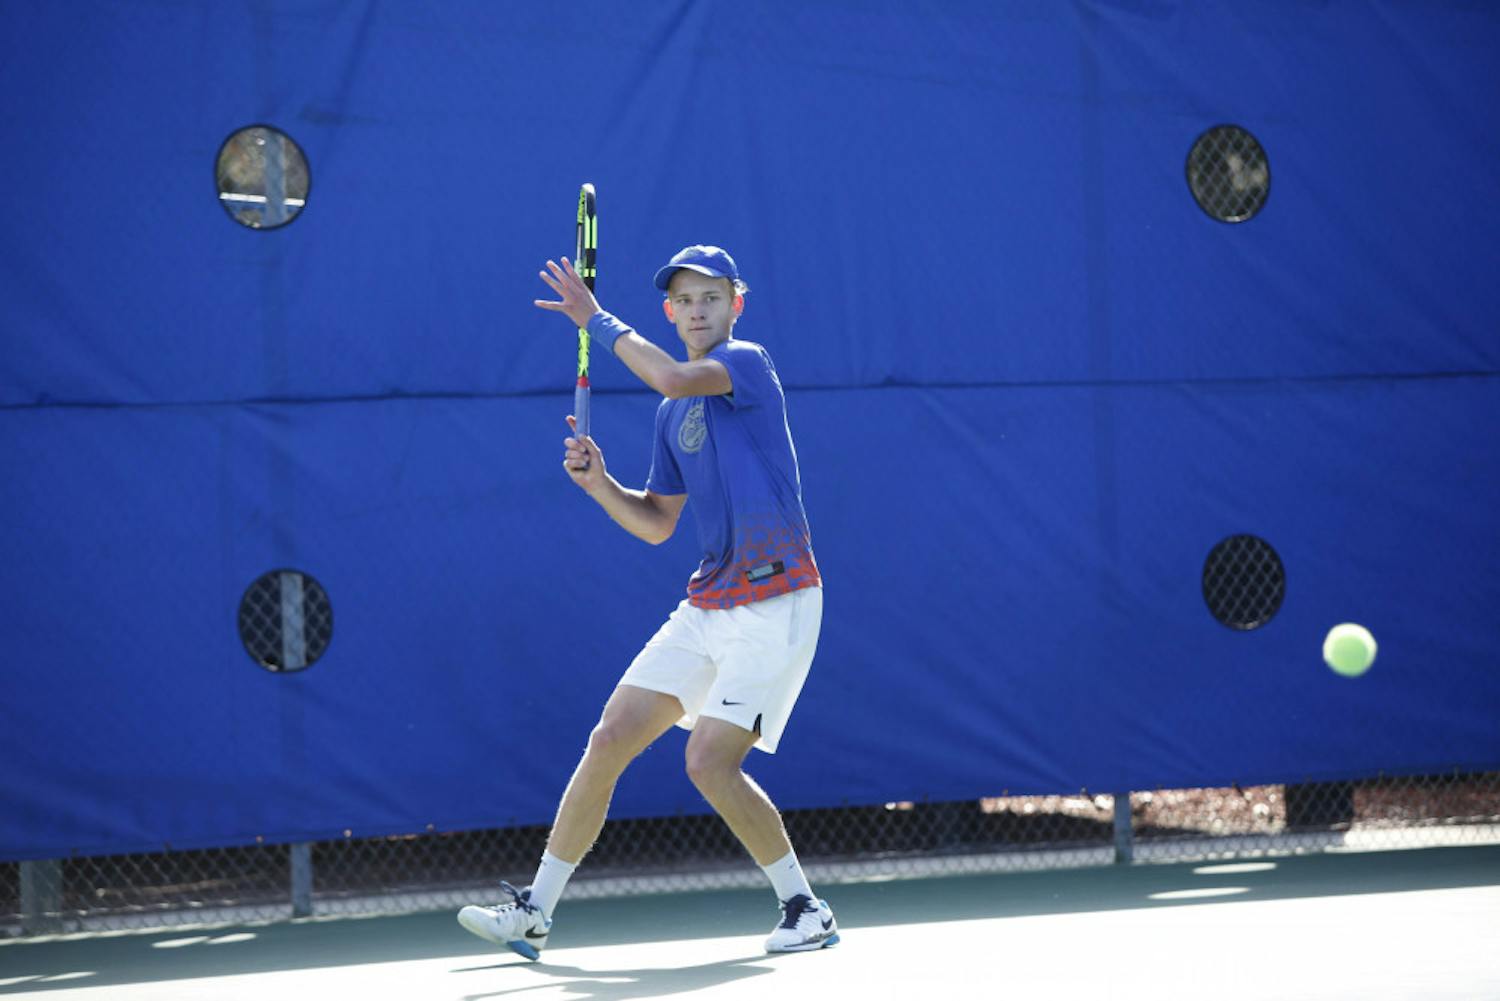 Florida sophomore Johannes Ingildsen lost in the third round of the City of Sunrise Pro Tennis Classic's qualifying draw on Sunday, leaving teammates Jordan Belga, Oliver Crawford and Duarte Vale as the only Gators remaining in the event.